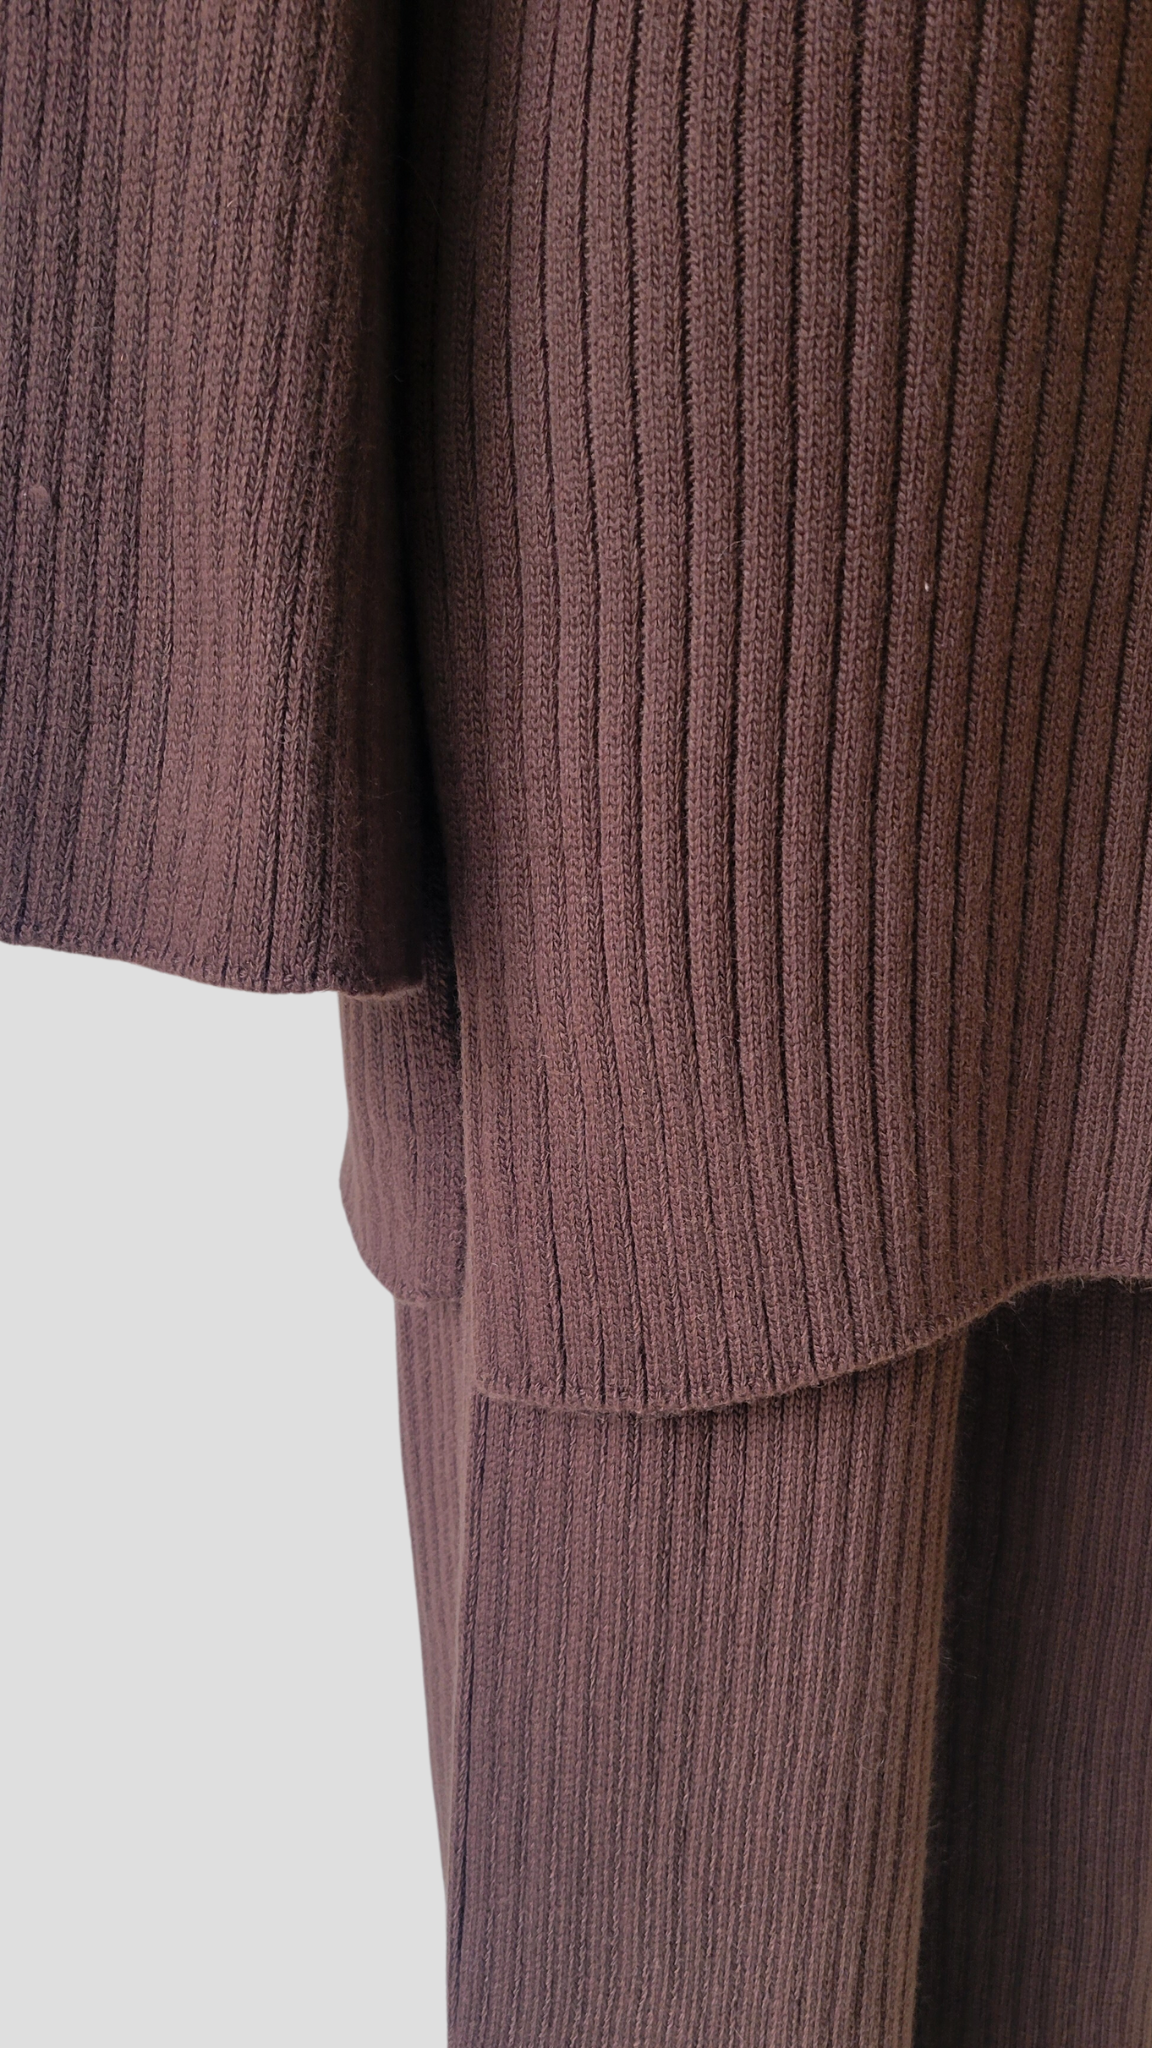 A chic two-piece knit co-ord set in 'Hot Fudge', a dark brown colour. The set includes a comfy sweater with a relaxed fit and matching knit pants. Perfect for a stylish and cozy look.